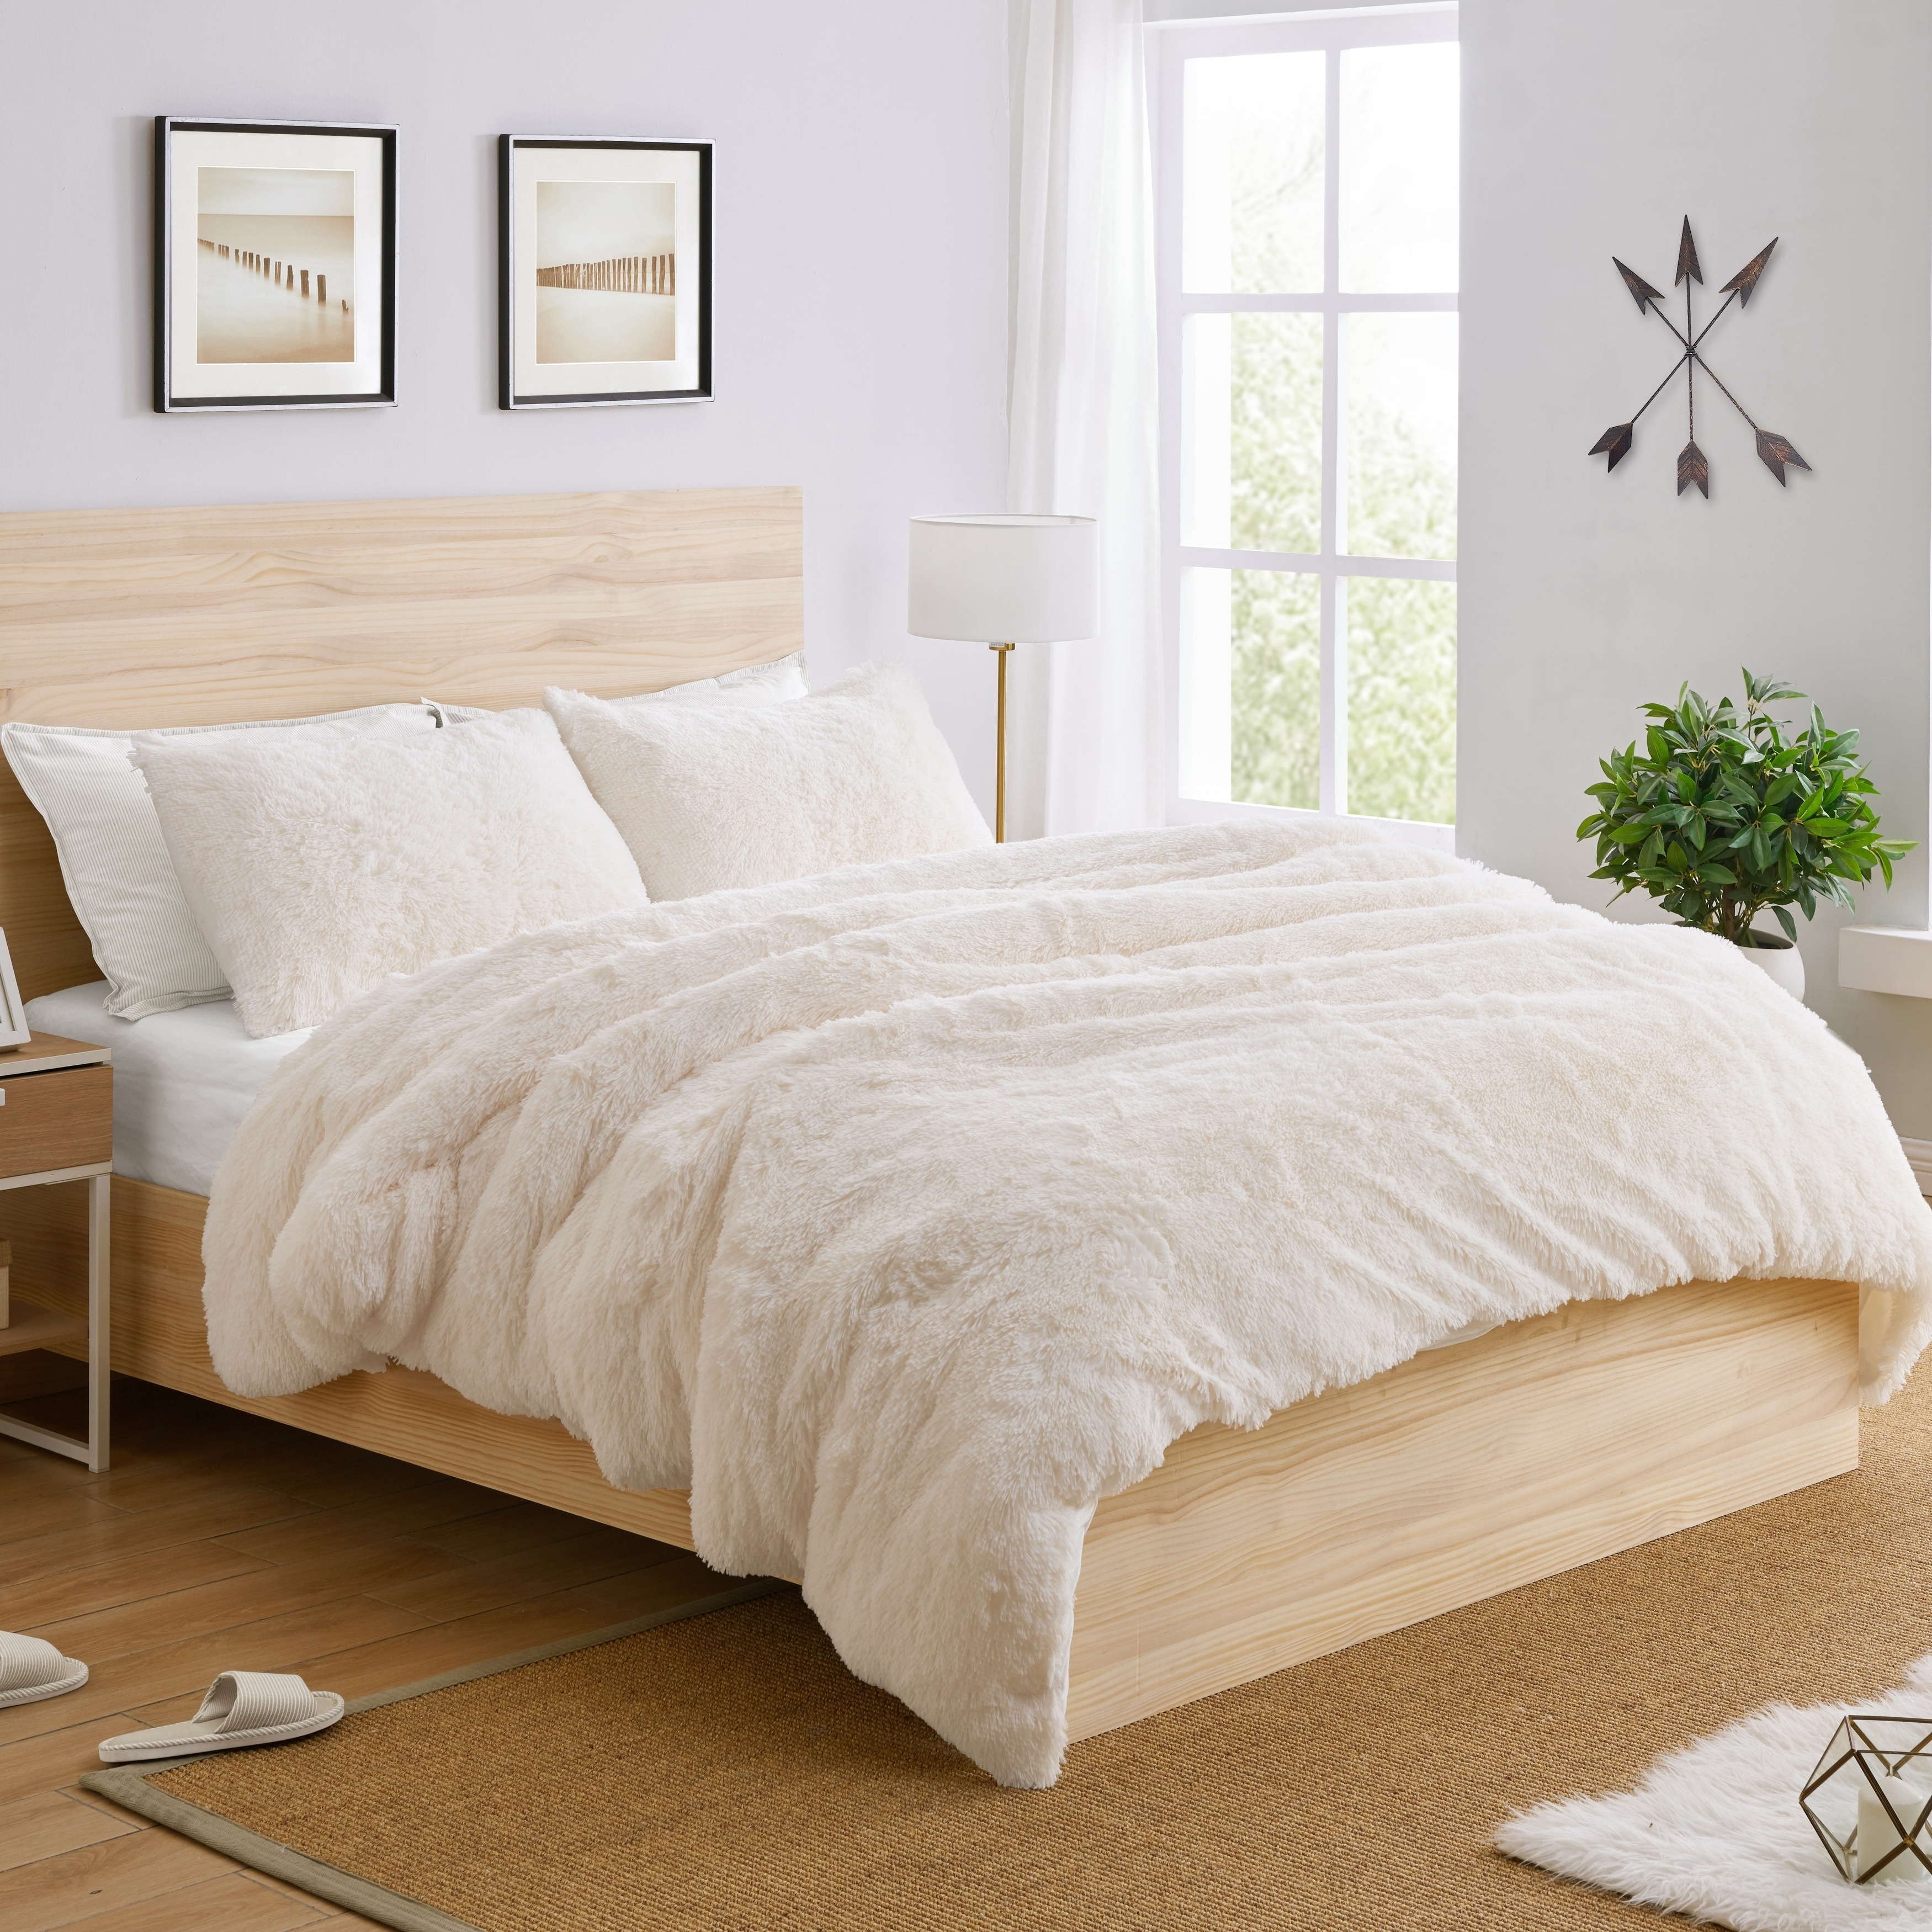 queen size bed sets